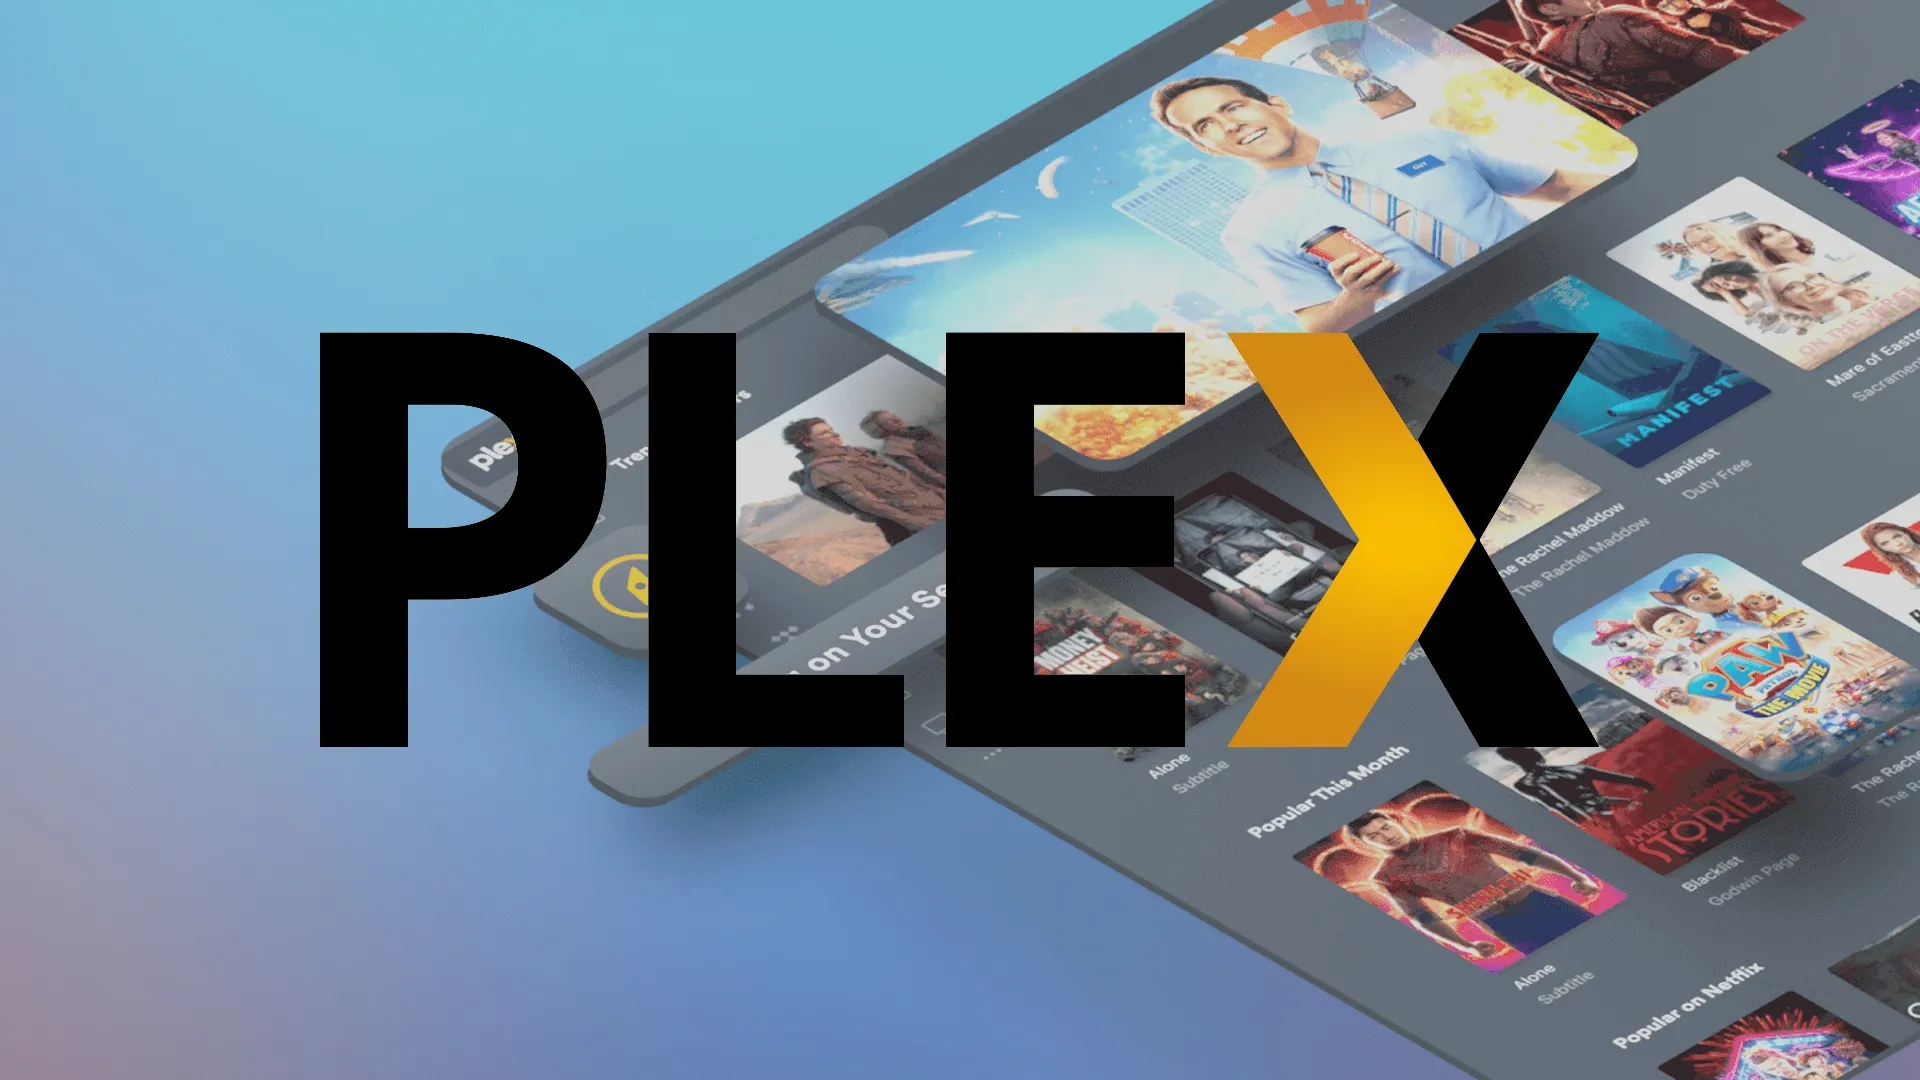 1920x1080 After years of delay, Plex replaces its desktop media player client